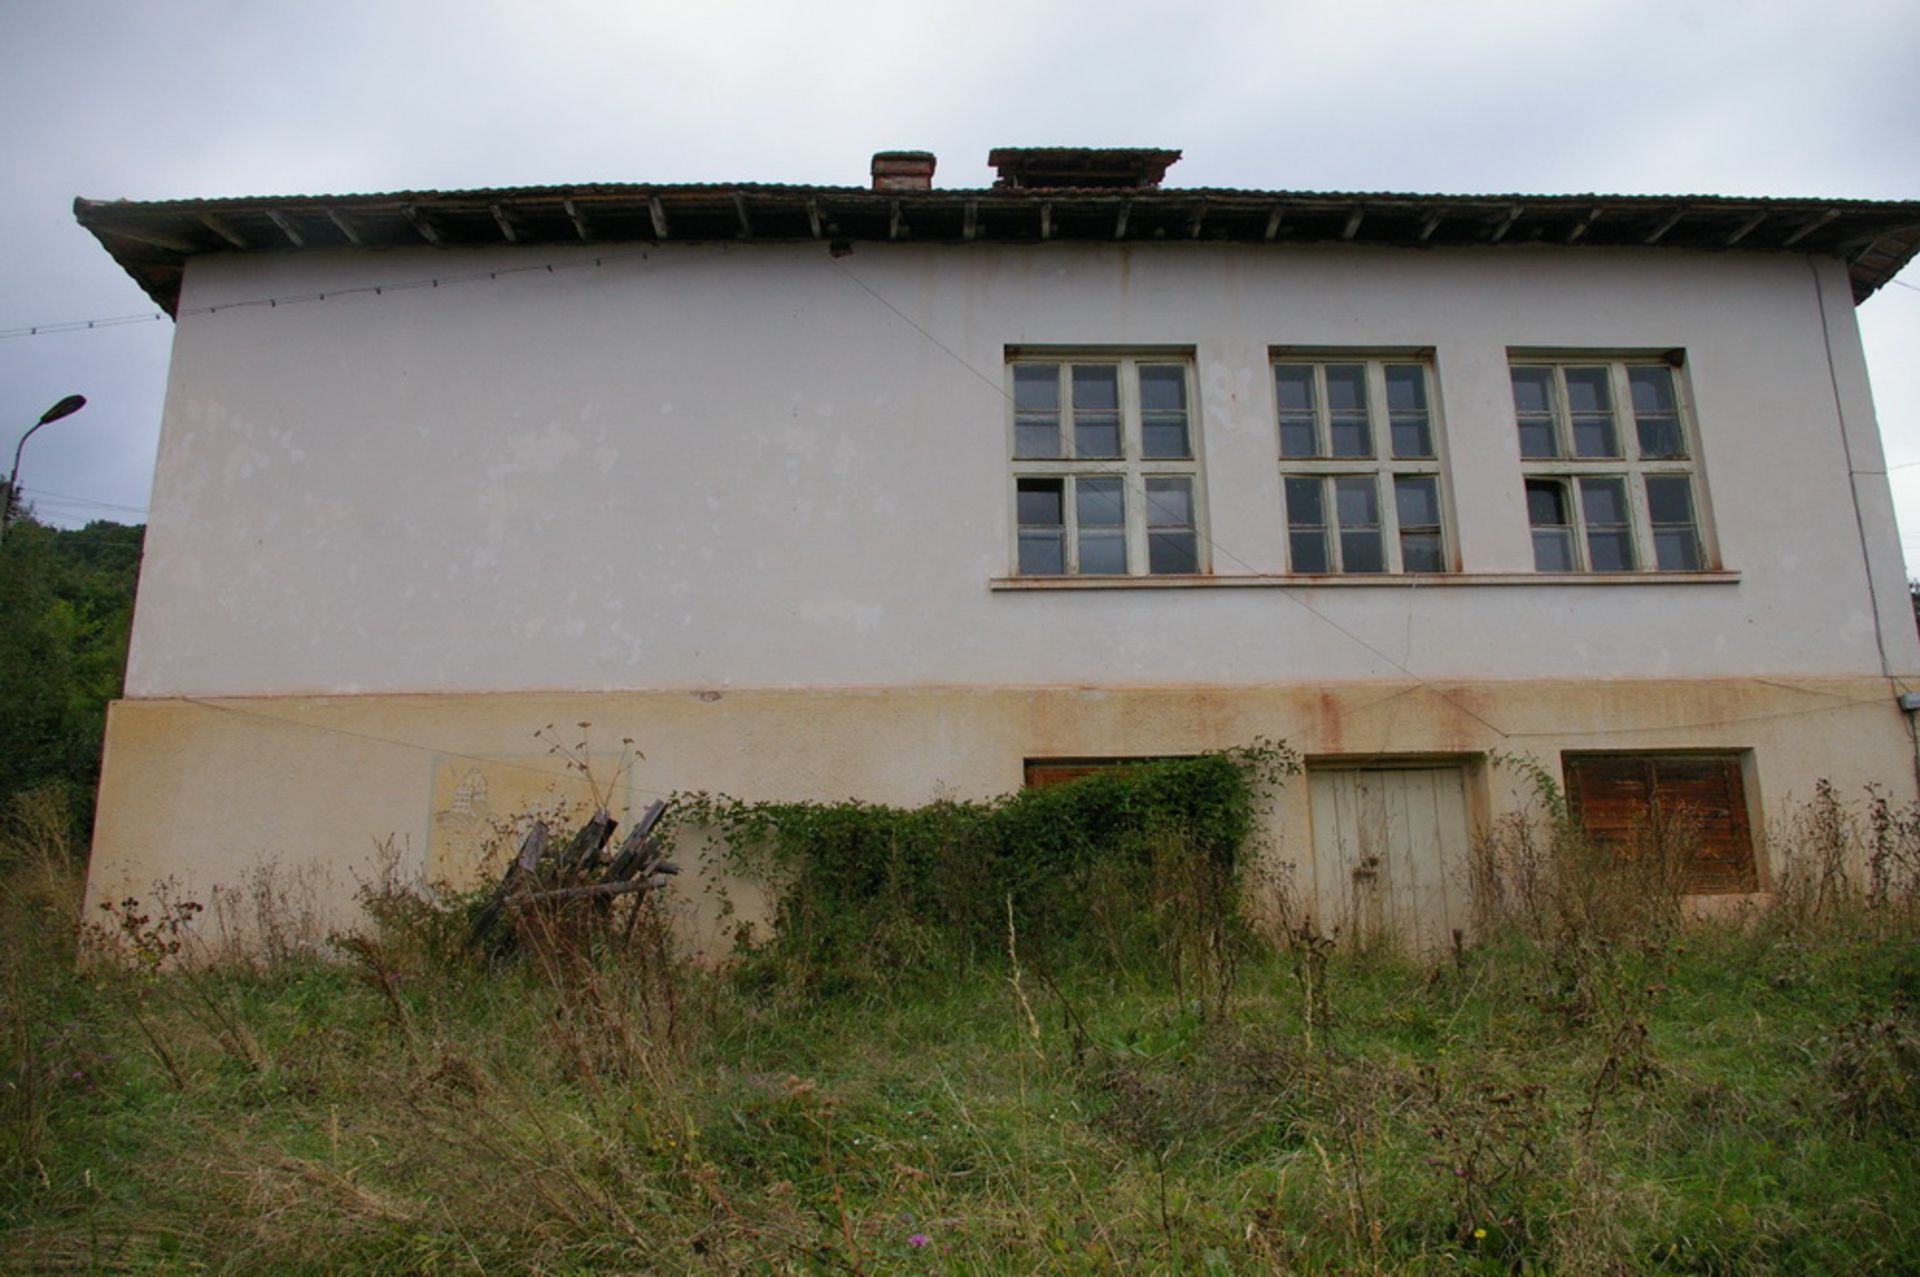 BD - Former state school with mountain views - one hour to the capital, Sofia + 2,000 sqm land